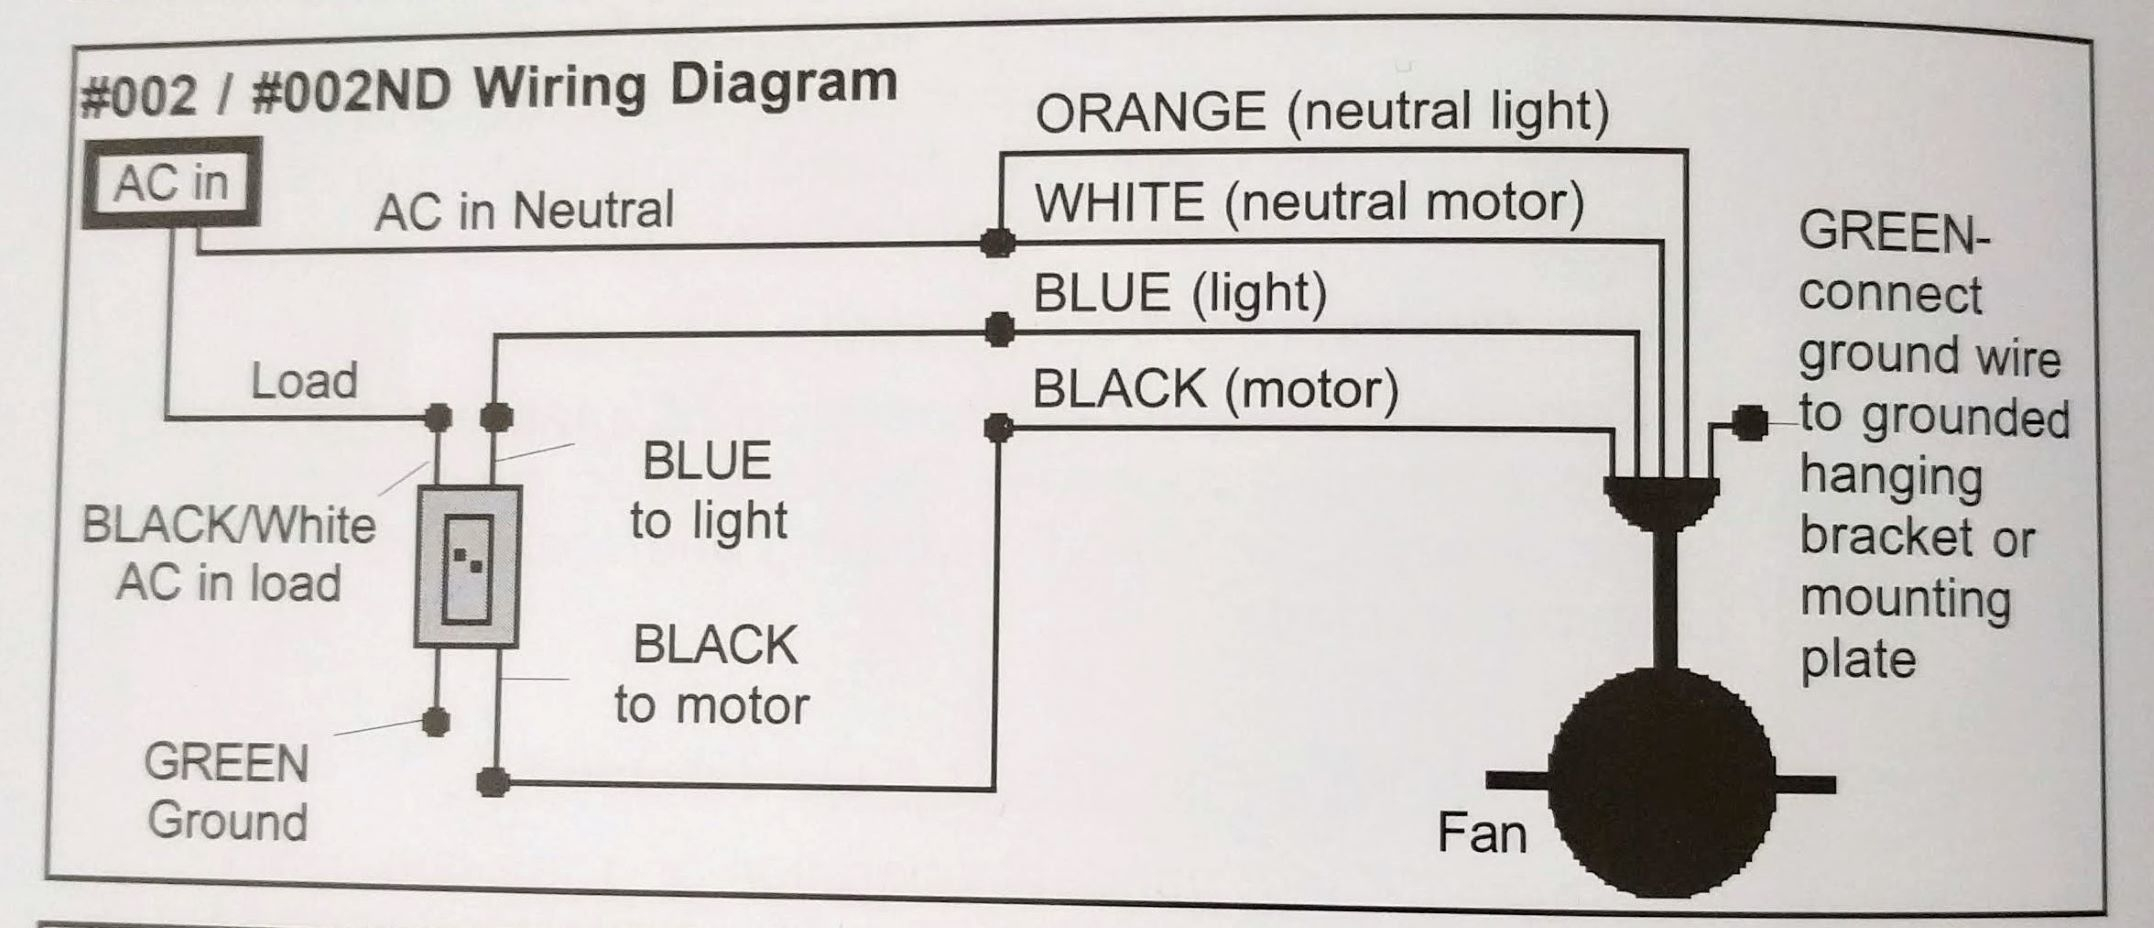 Wiring A Ceiling Fan With Black White Red Green In intended for size 2154 X 928